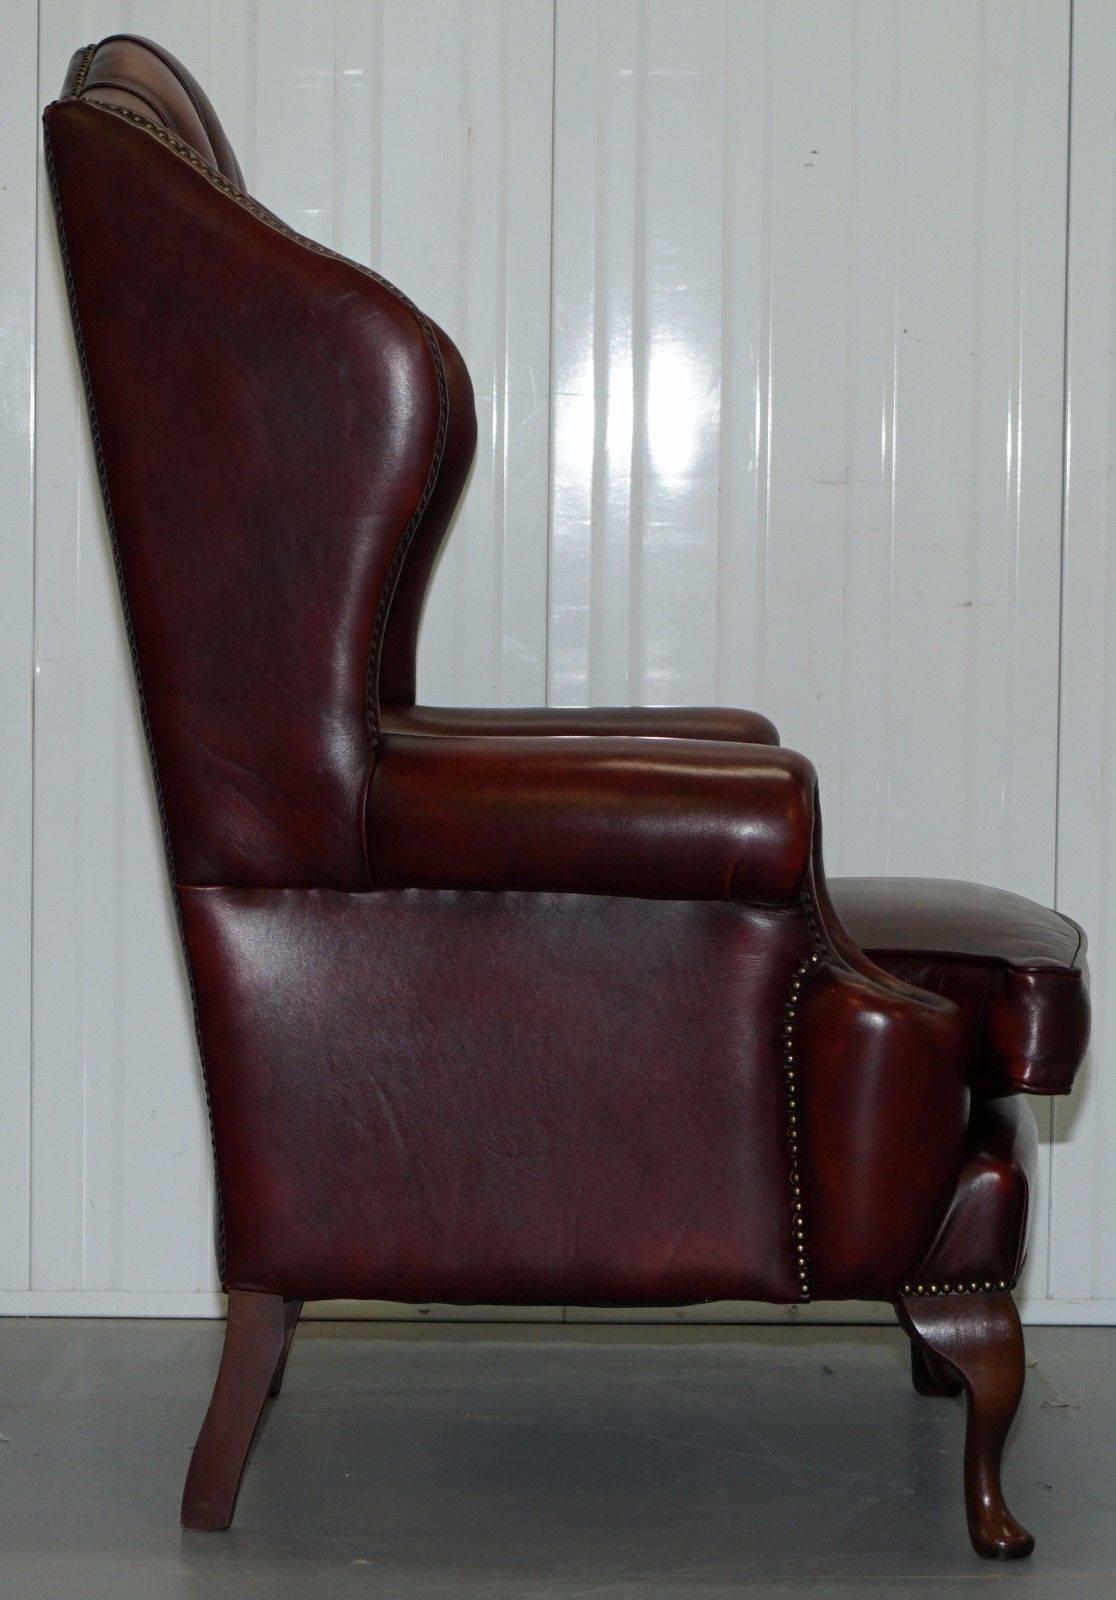 Contemporary Bevan Funnell November Chesterfield Oxblood Leather Wingback Armchair